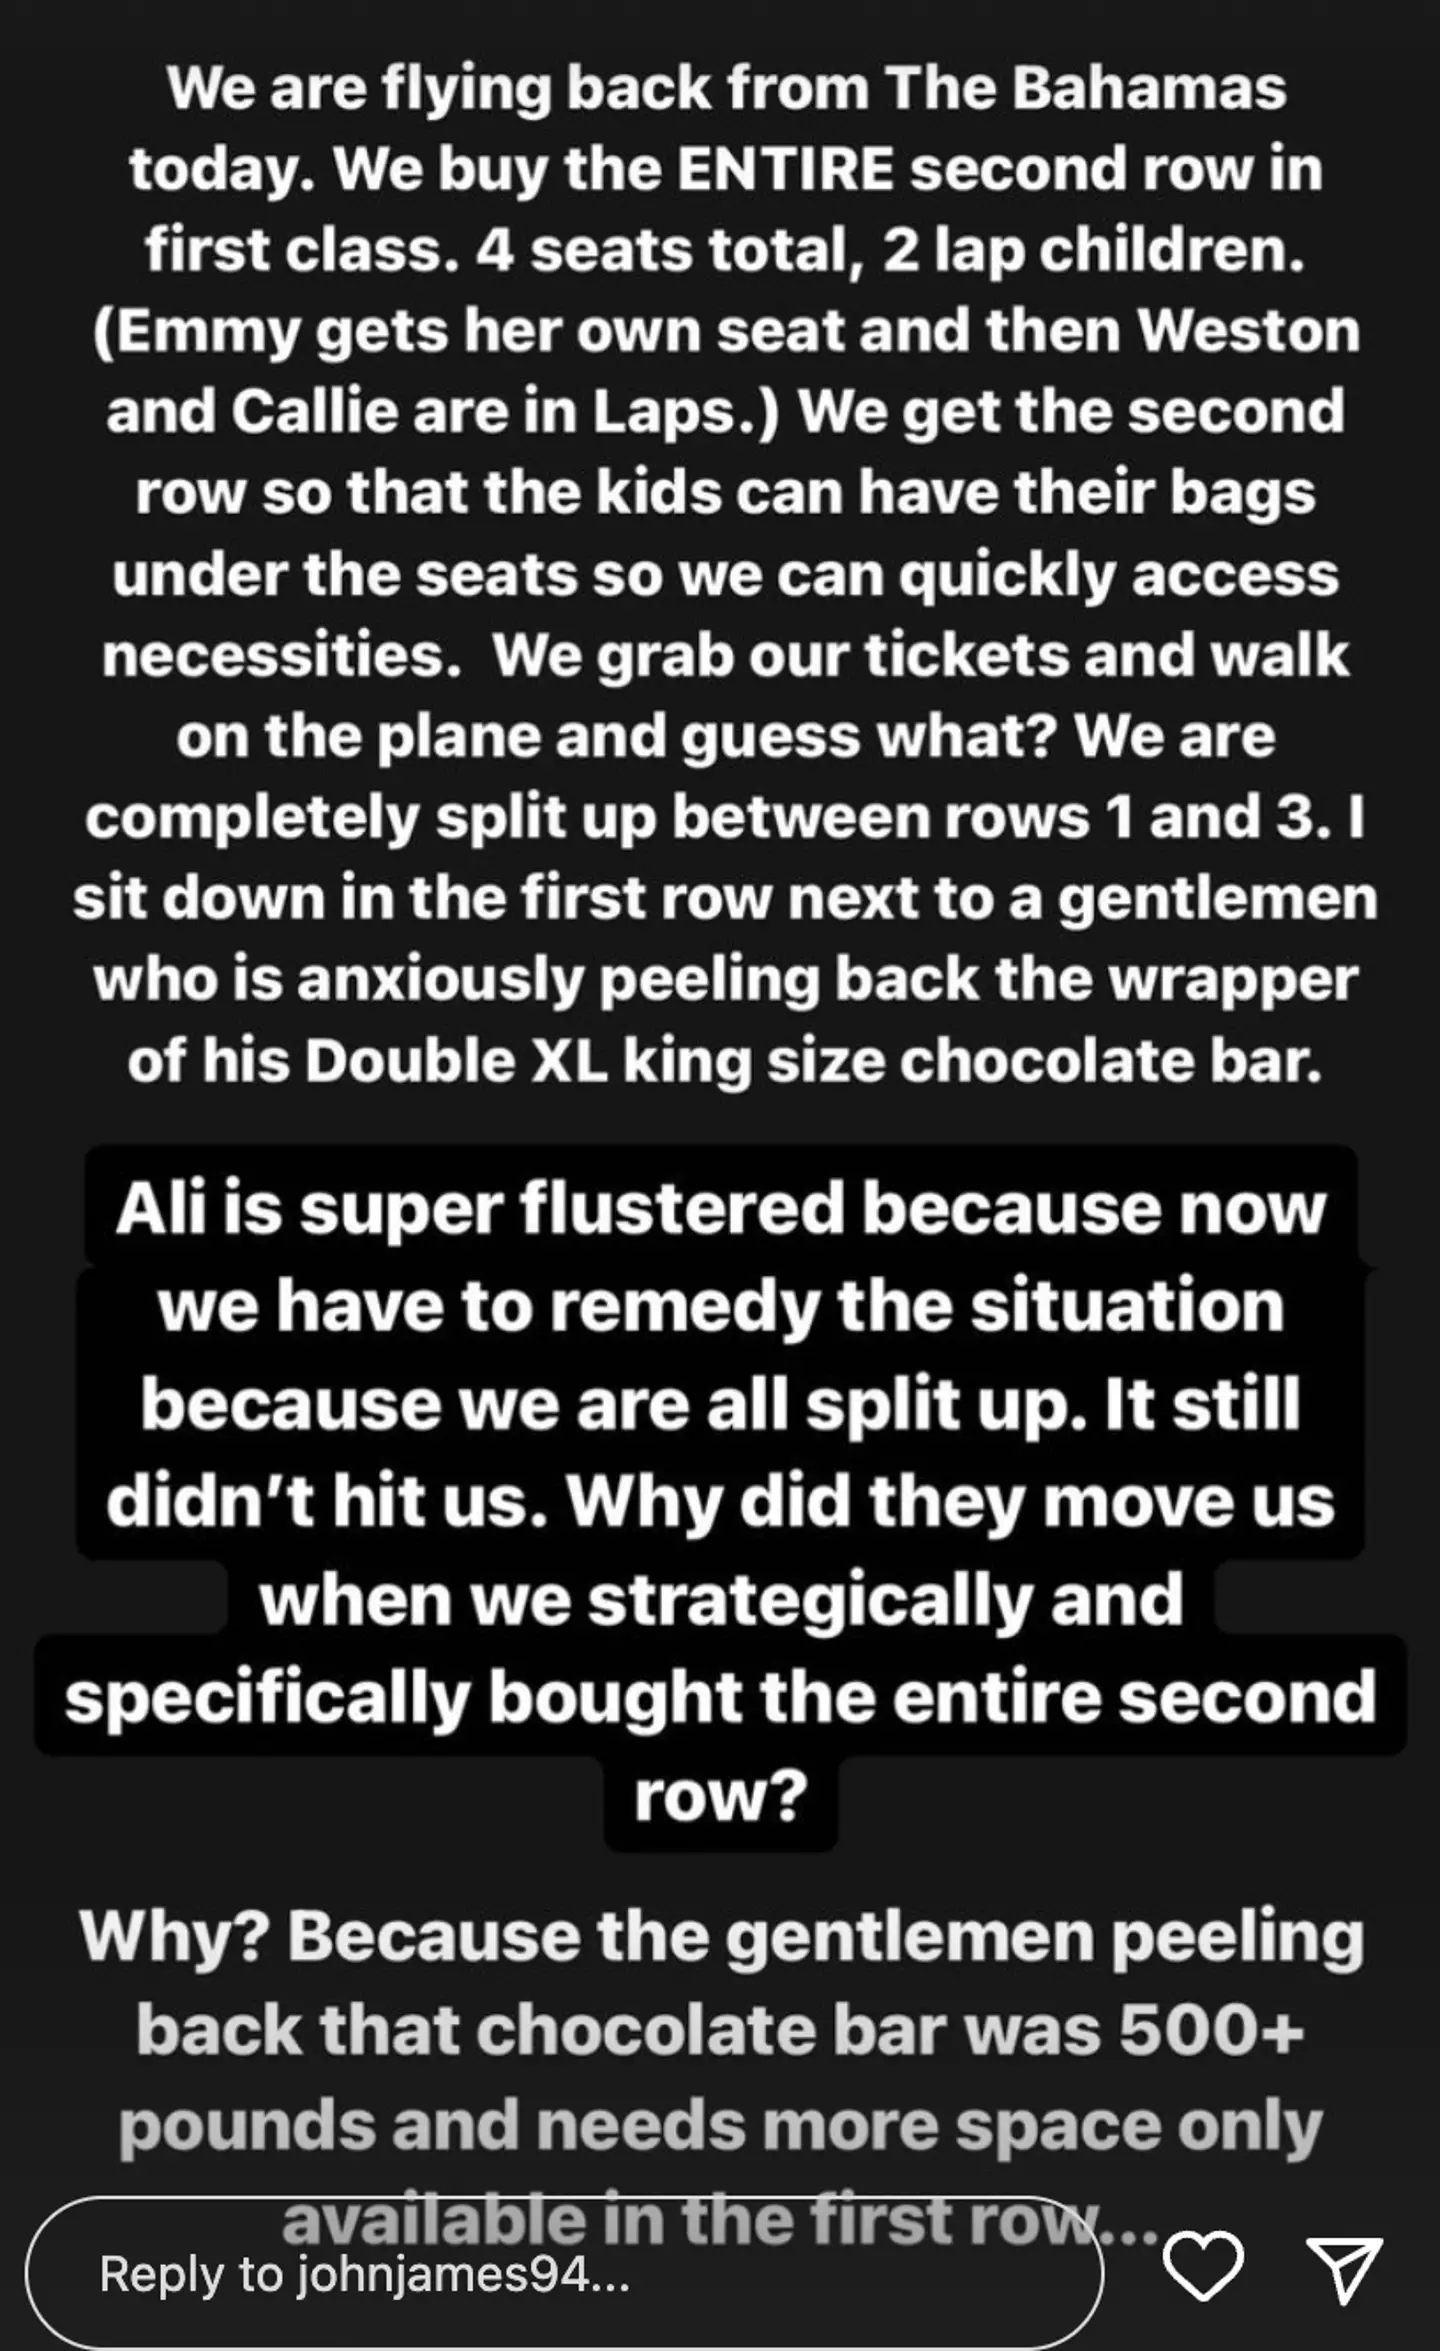 John James took to Instagram to rant about his family being separated on their flight to accommodate an obese man.